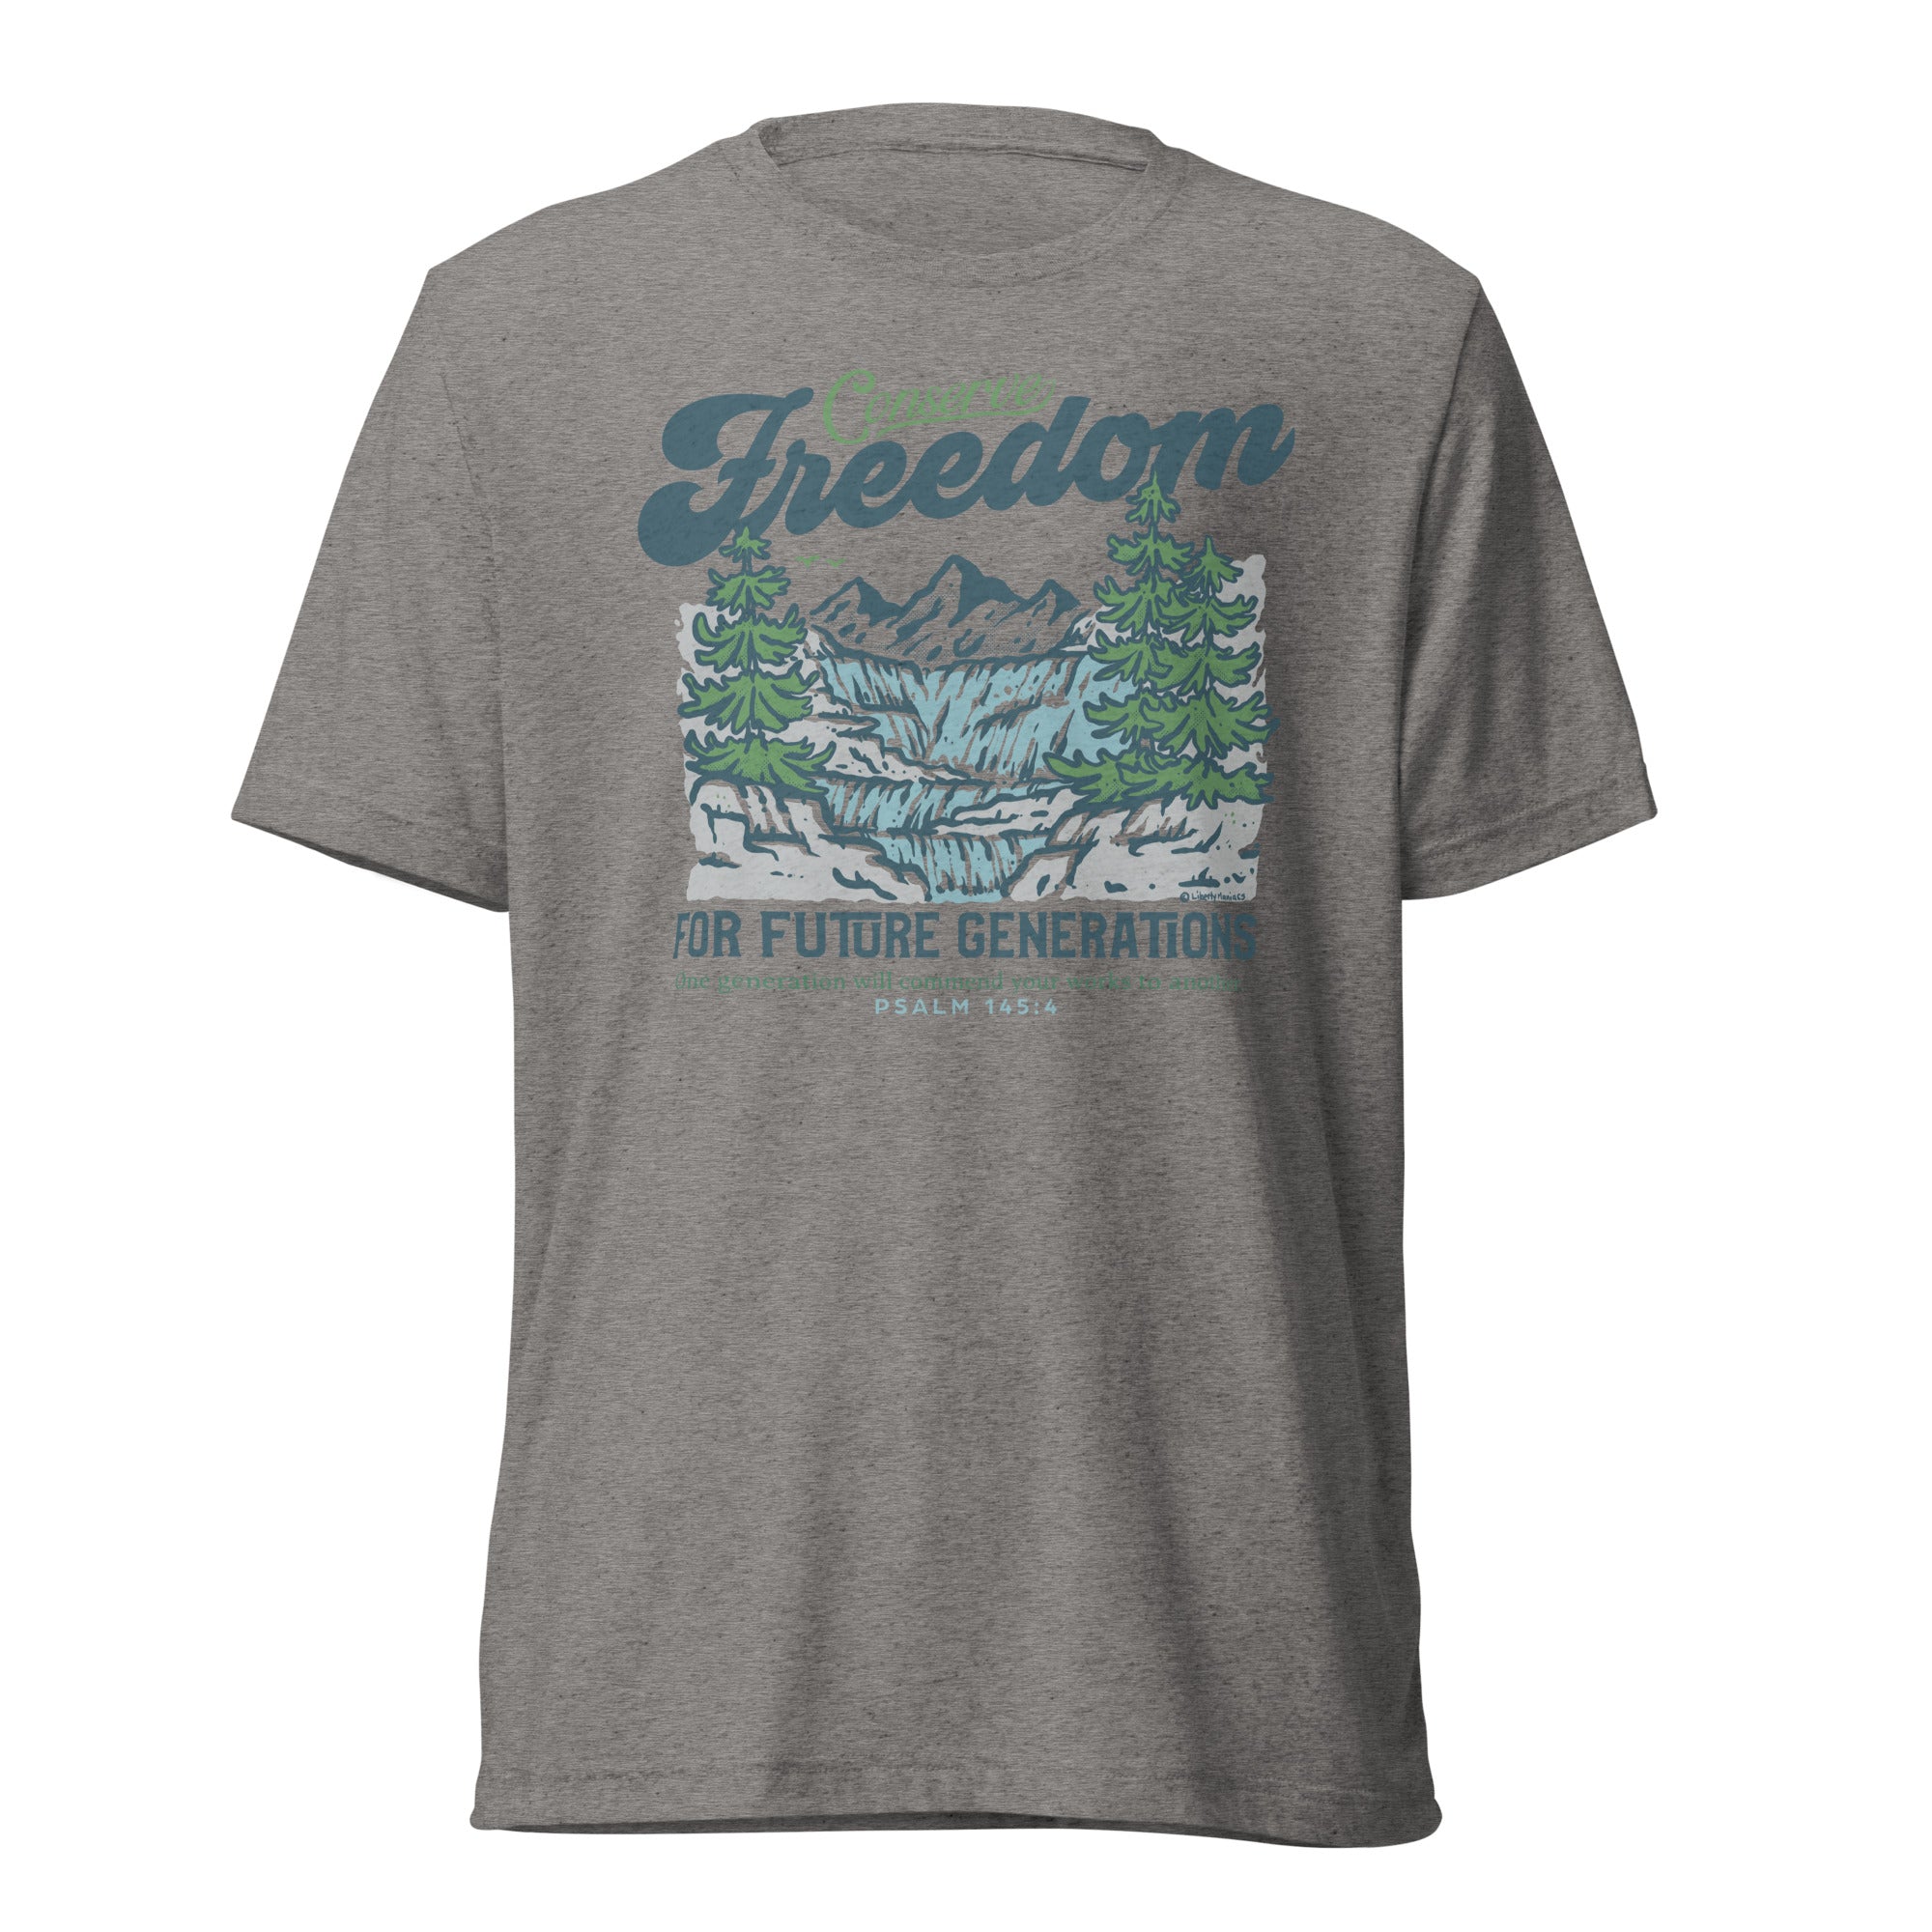 Conserve Freedom for Future Generations Tri-Blend T-Shirt